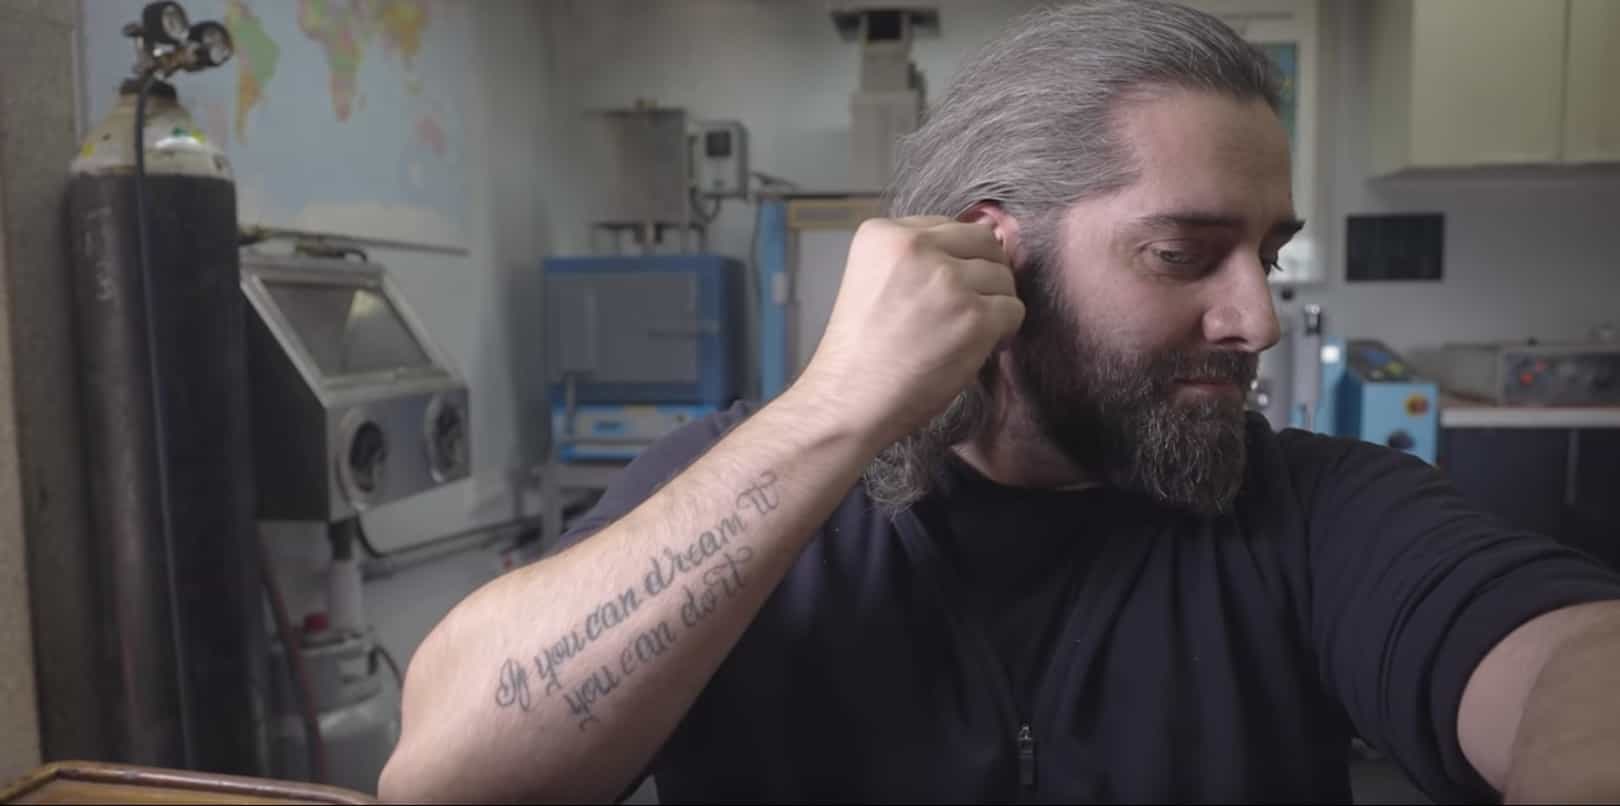 This Guy Turns $159 Airpods into 18K